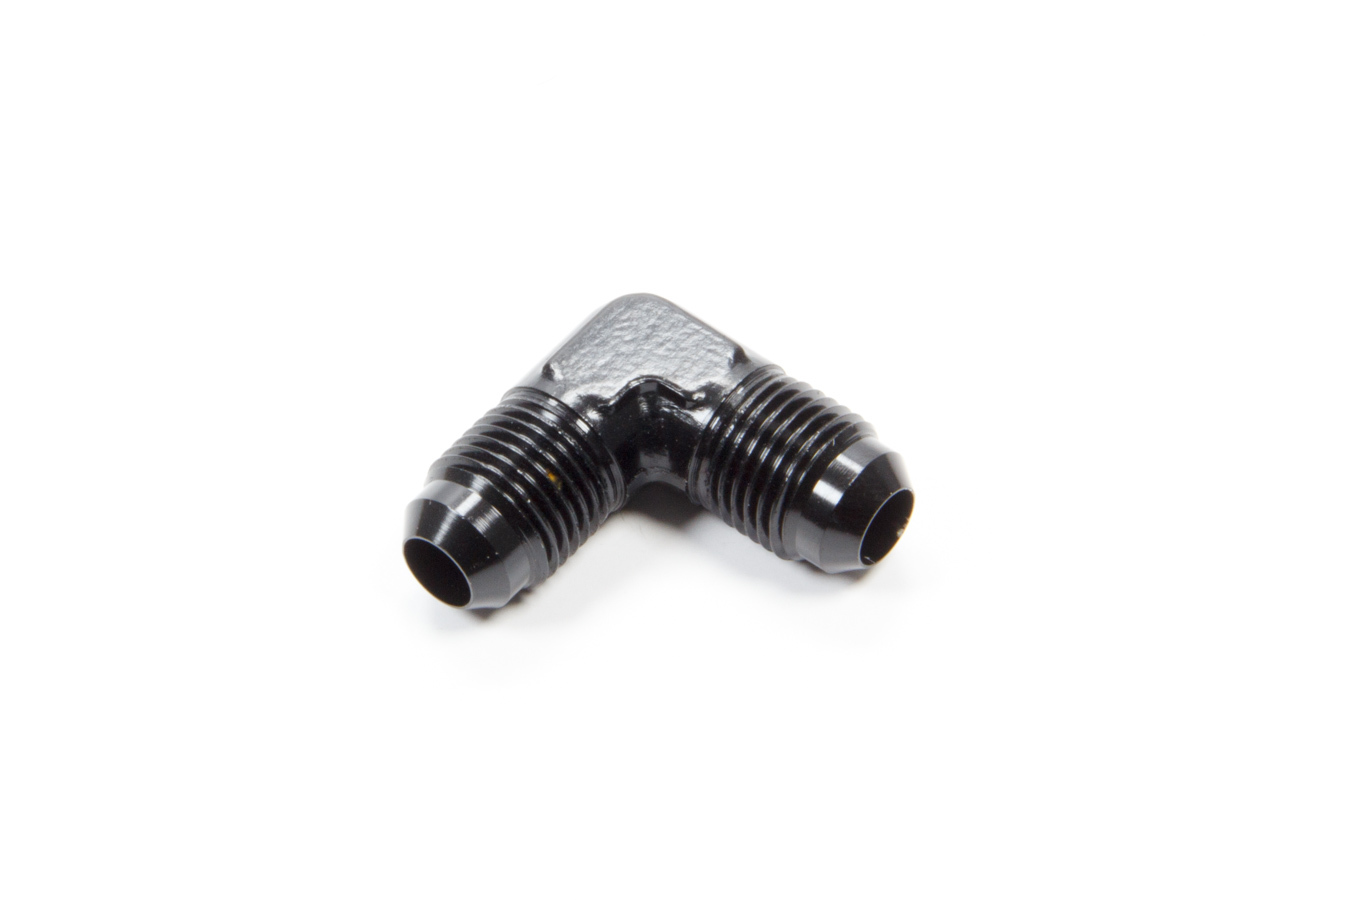 Aeroquip FCM5120 Fitting, Adapter, 90 Degree, 6 AN Male to 6 AN Male, Aluminum, Black Anodized, Each